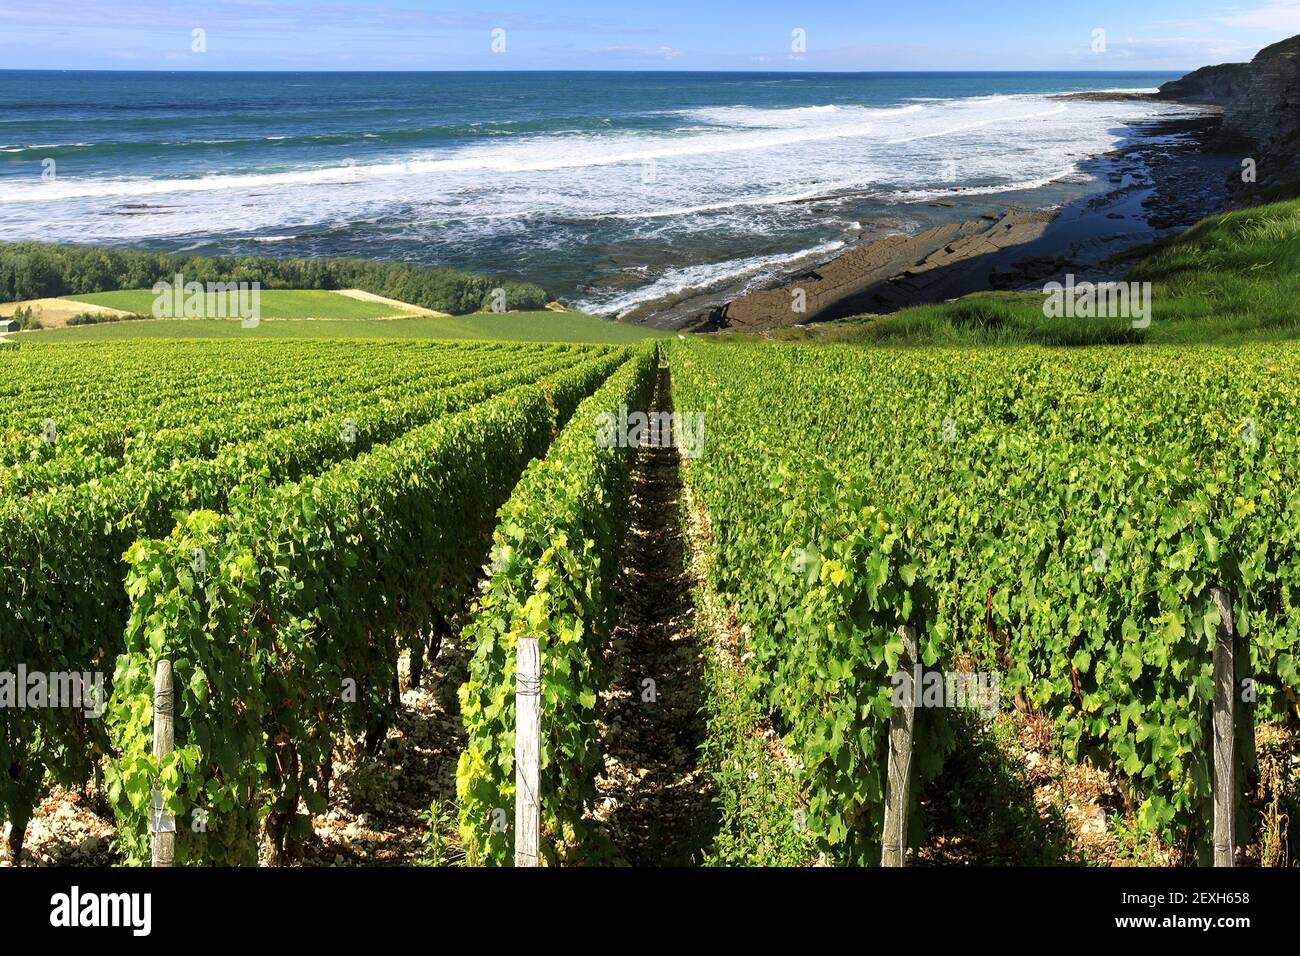 Vineyard by the sea Stock Photo